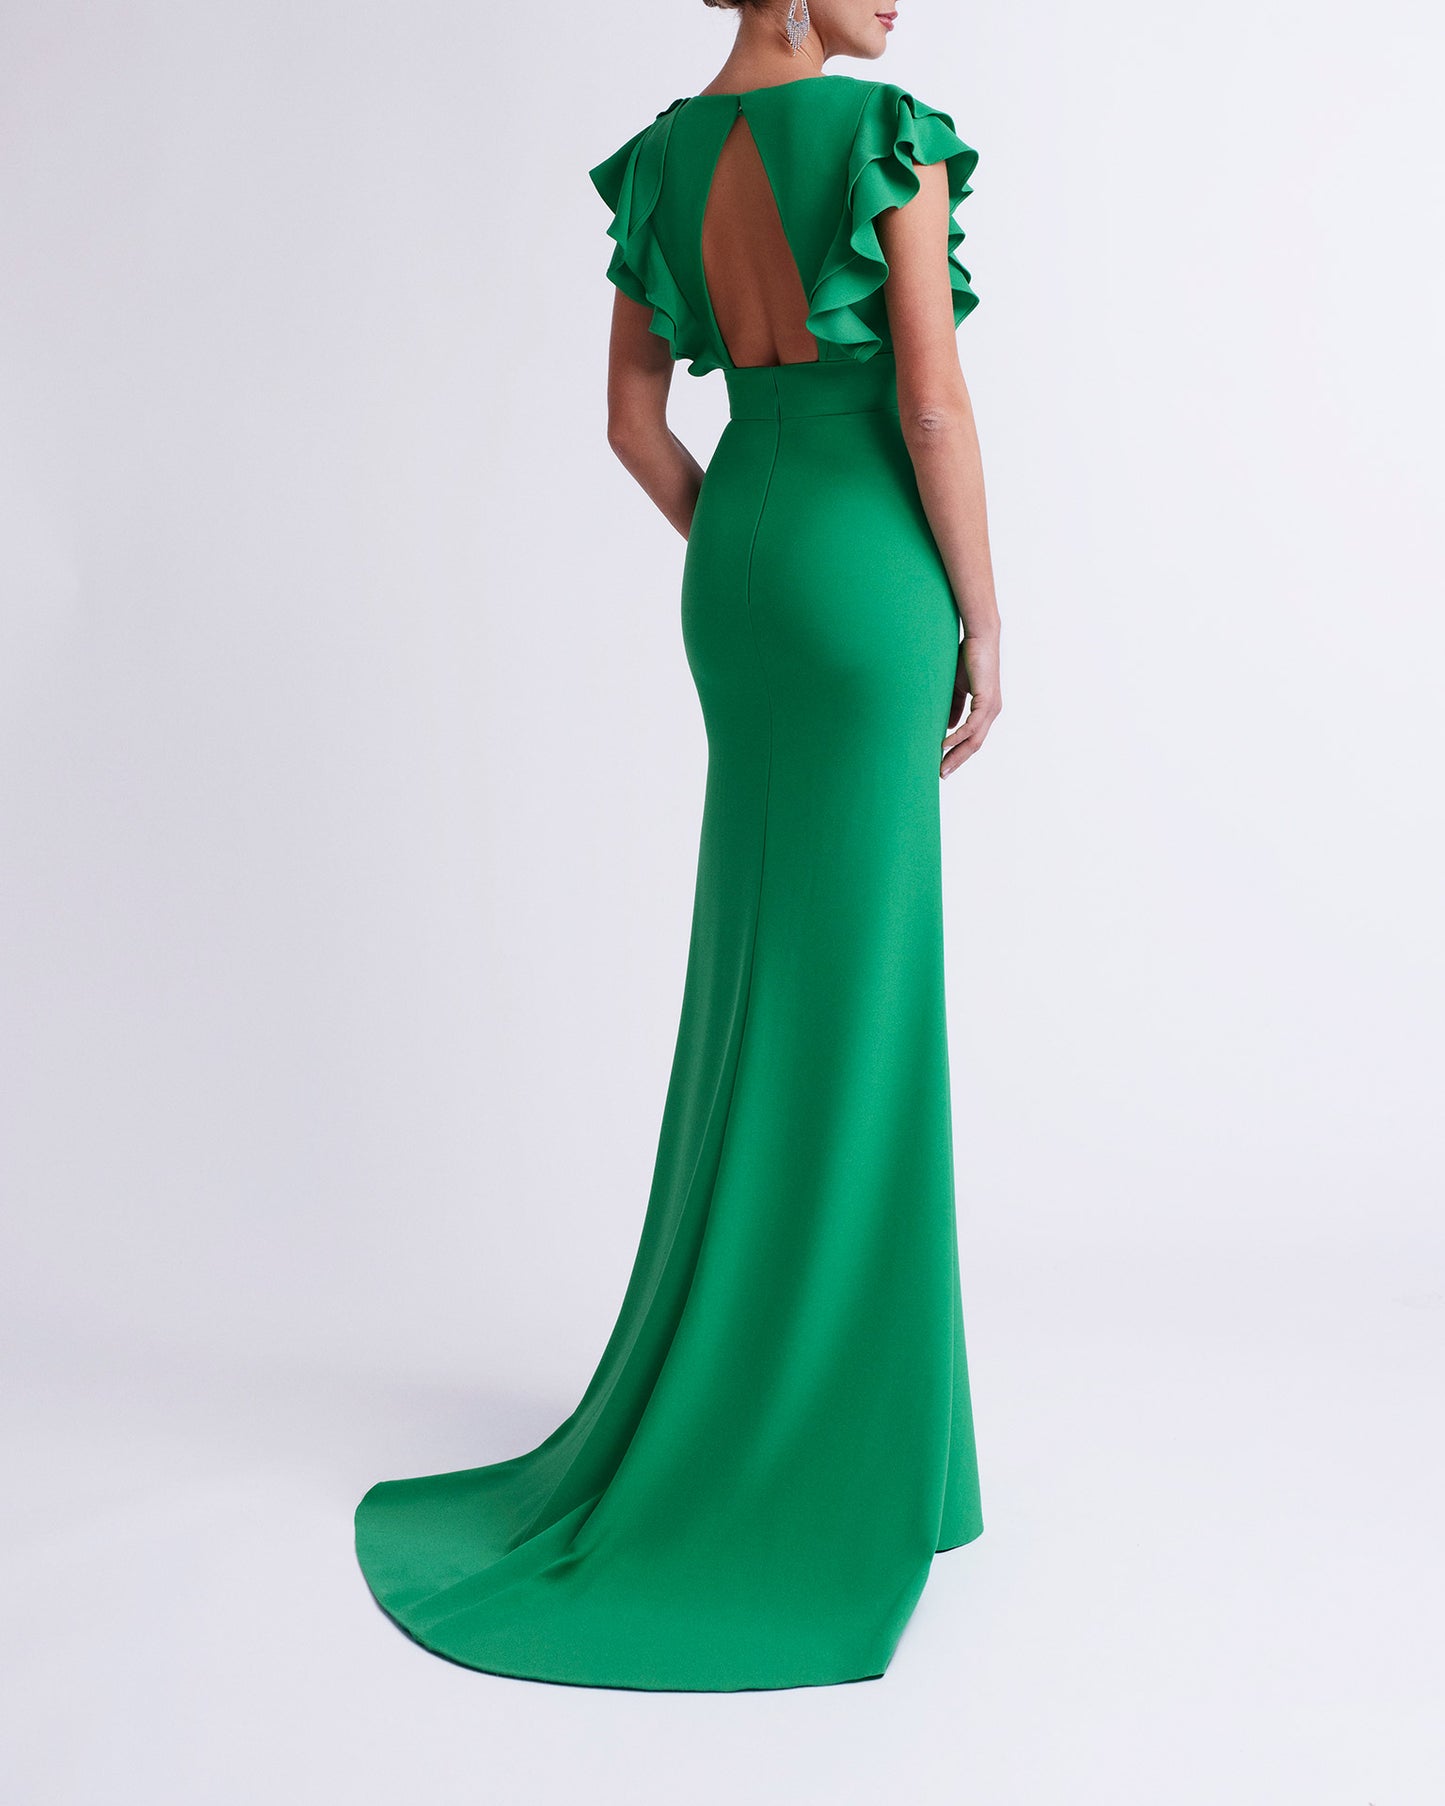 Evening Dress by Aire Barcelona